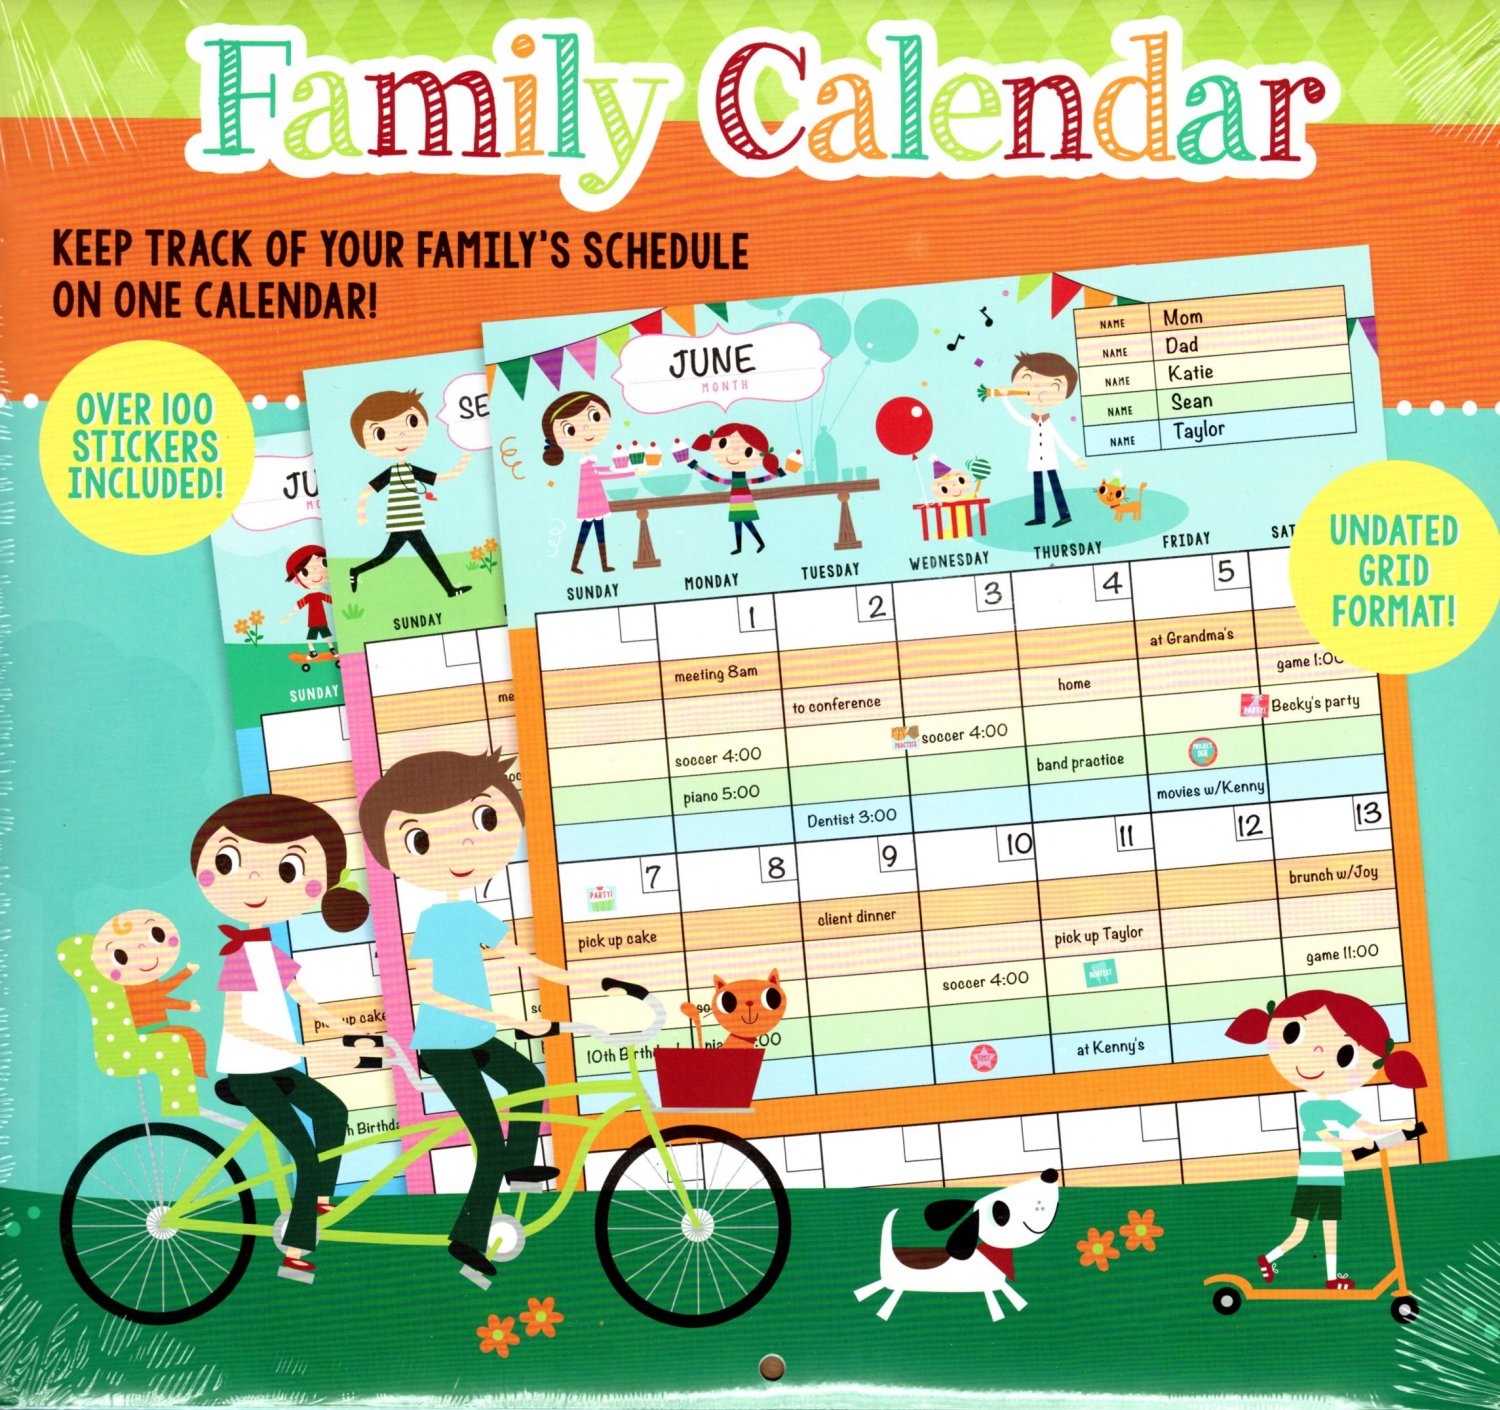 12 Month Family Wall Calendar - Undated Grid Format - Over 100 Stickers Included v1